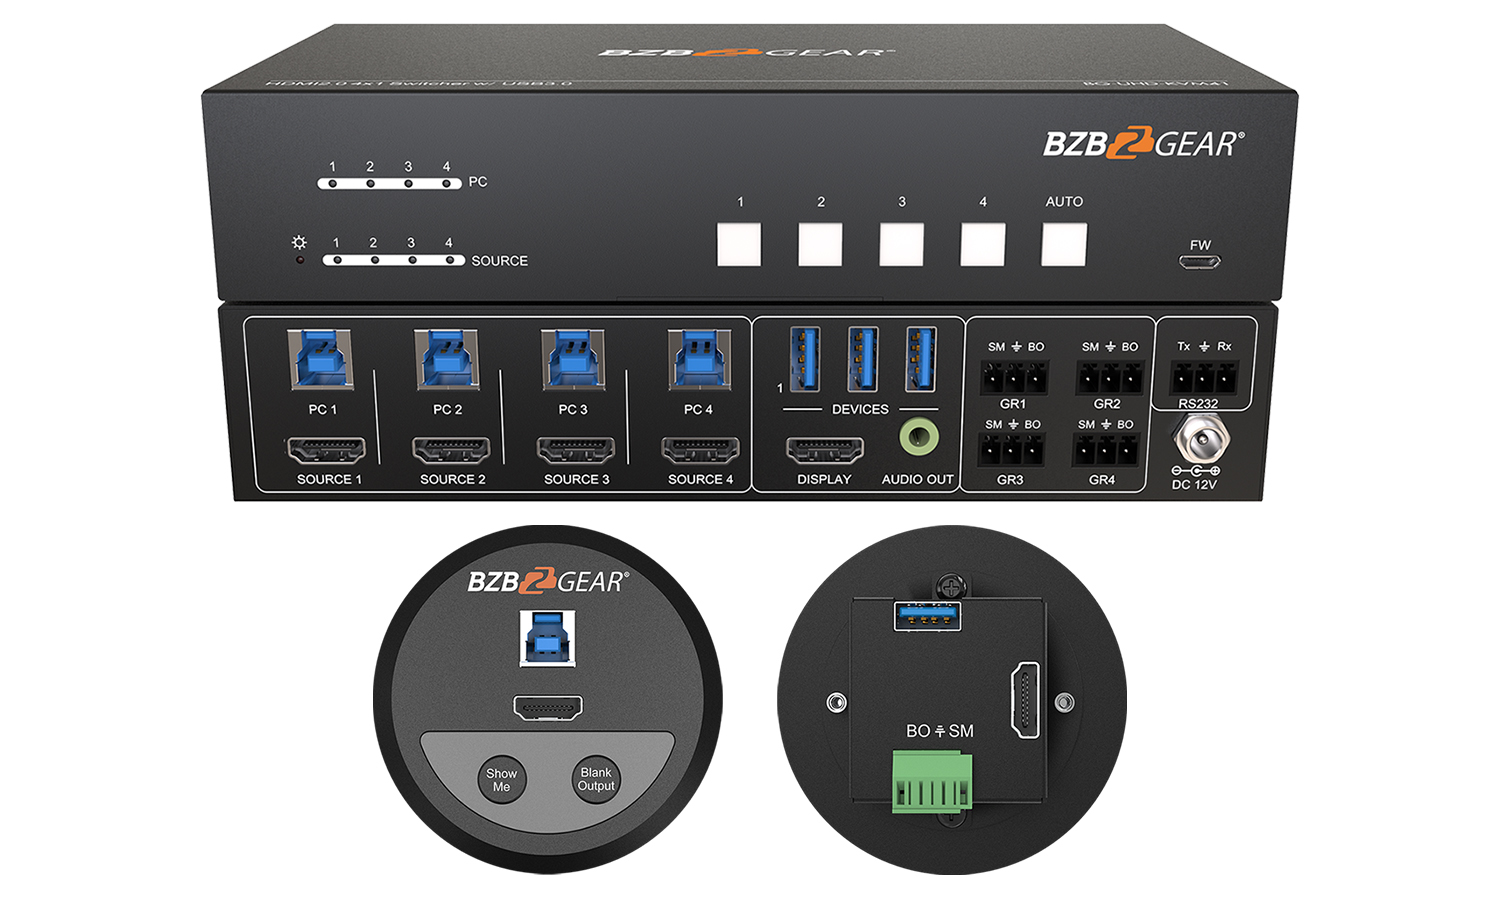 BZBGEAR BG-UHD-KVM41-KIT 4-Port 4K UHD KVM and Conference Room Switcher with HDMI and USB 3.0 Kit with 4 Table Grommets